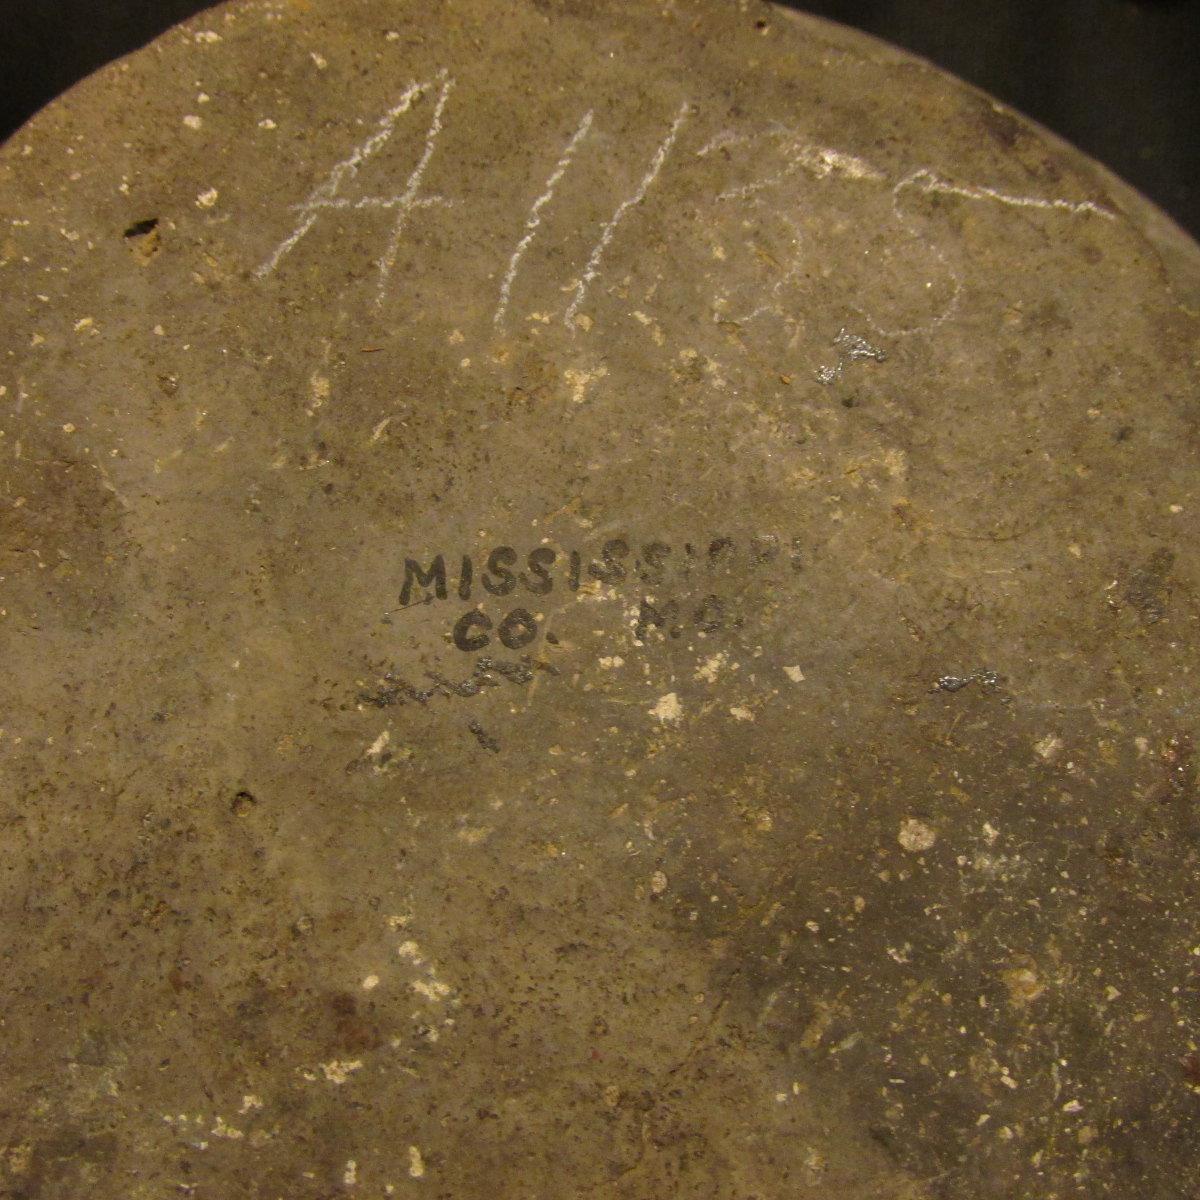 Bottom Portion of a water vase from the Mississippian Culture Native American Indians, labeled on bo